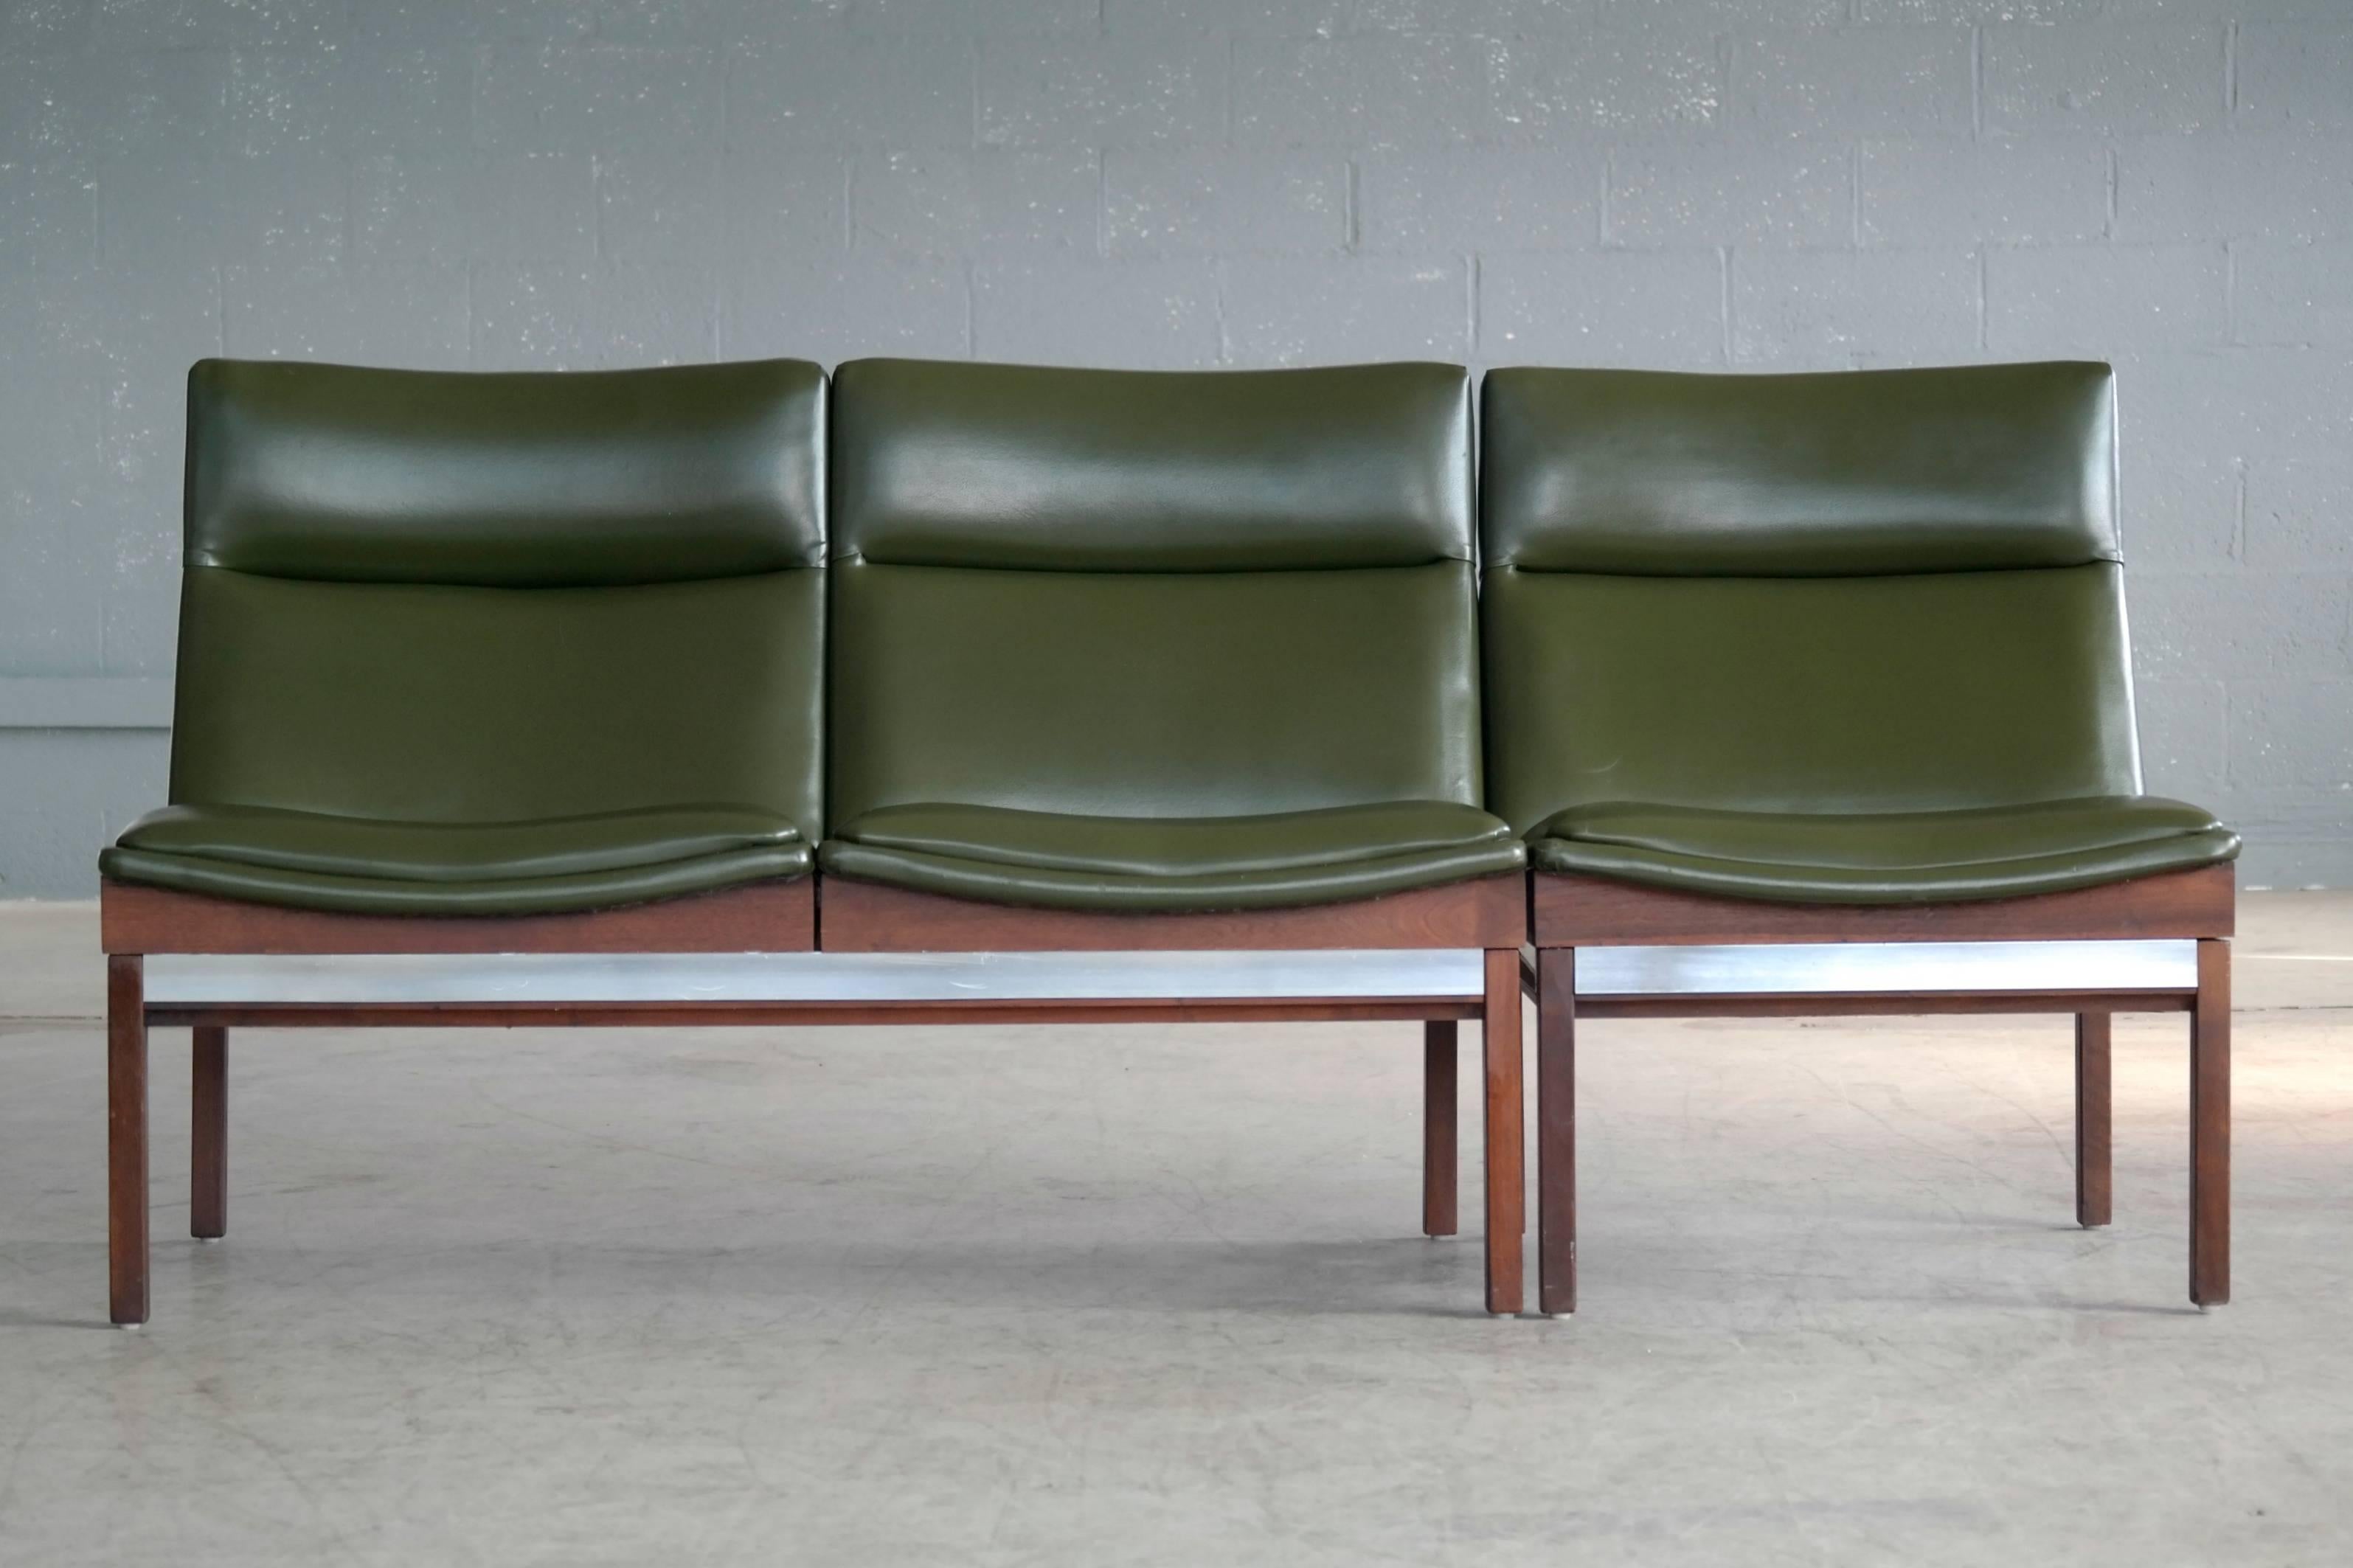 Ultra cool modular two-seat sofa and lounge chair in walnut with aluminum accents and covered in green Naugahyde designed by Arthur Umanoff in the 1950s for Madison Furniture Industries. Overall very good condition with a few small blemishes to the